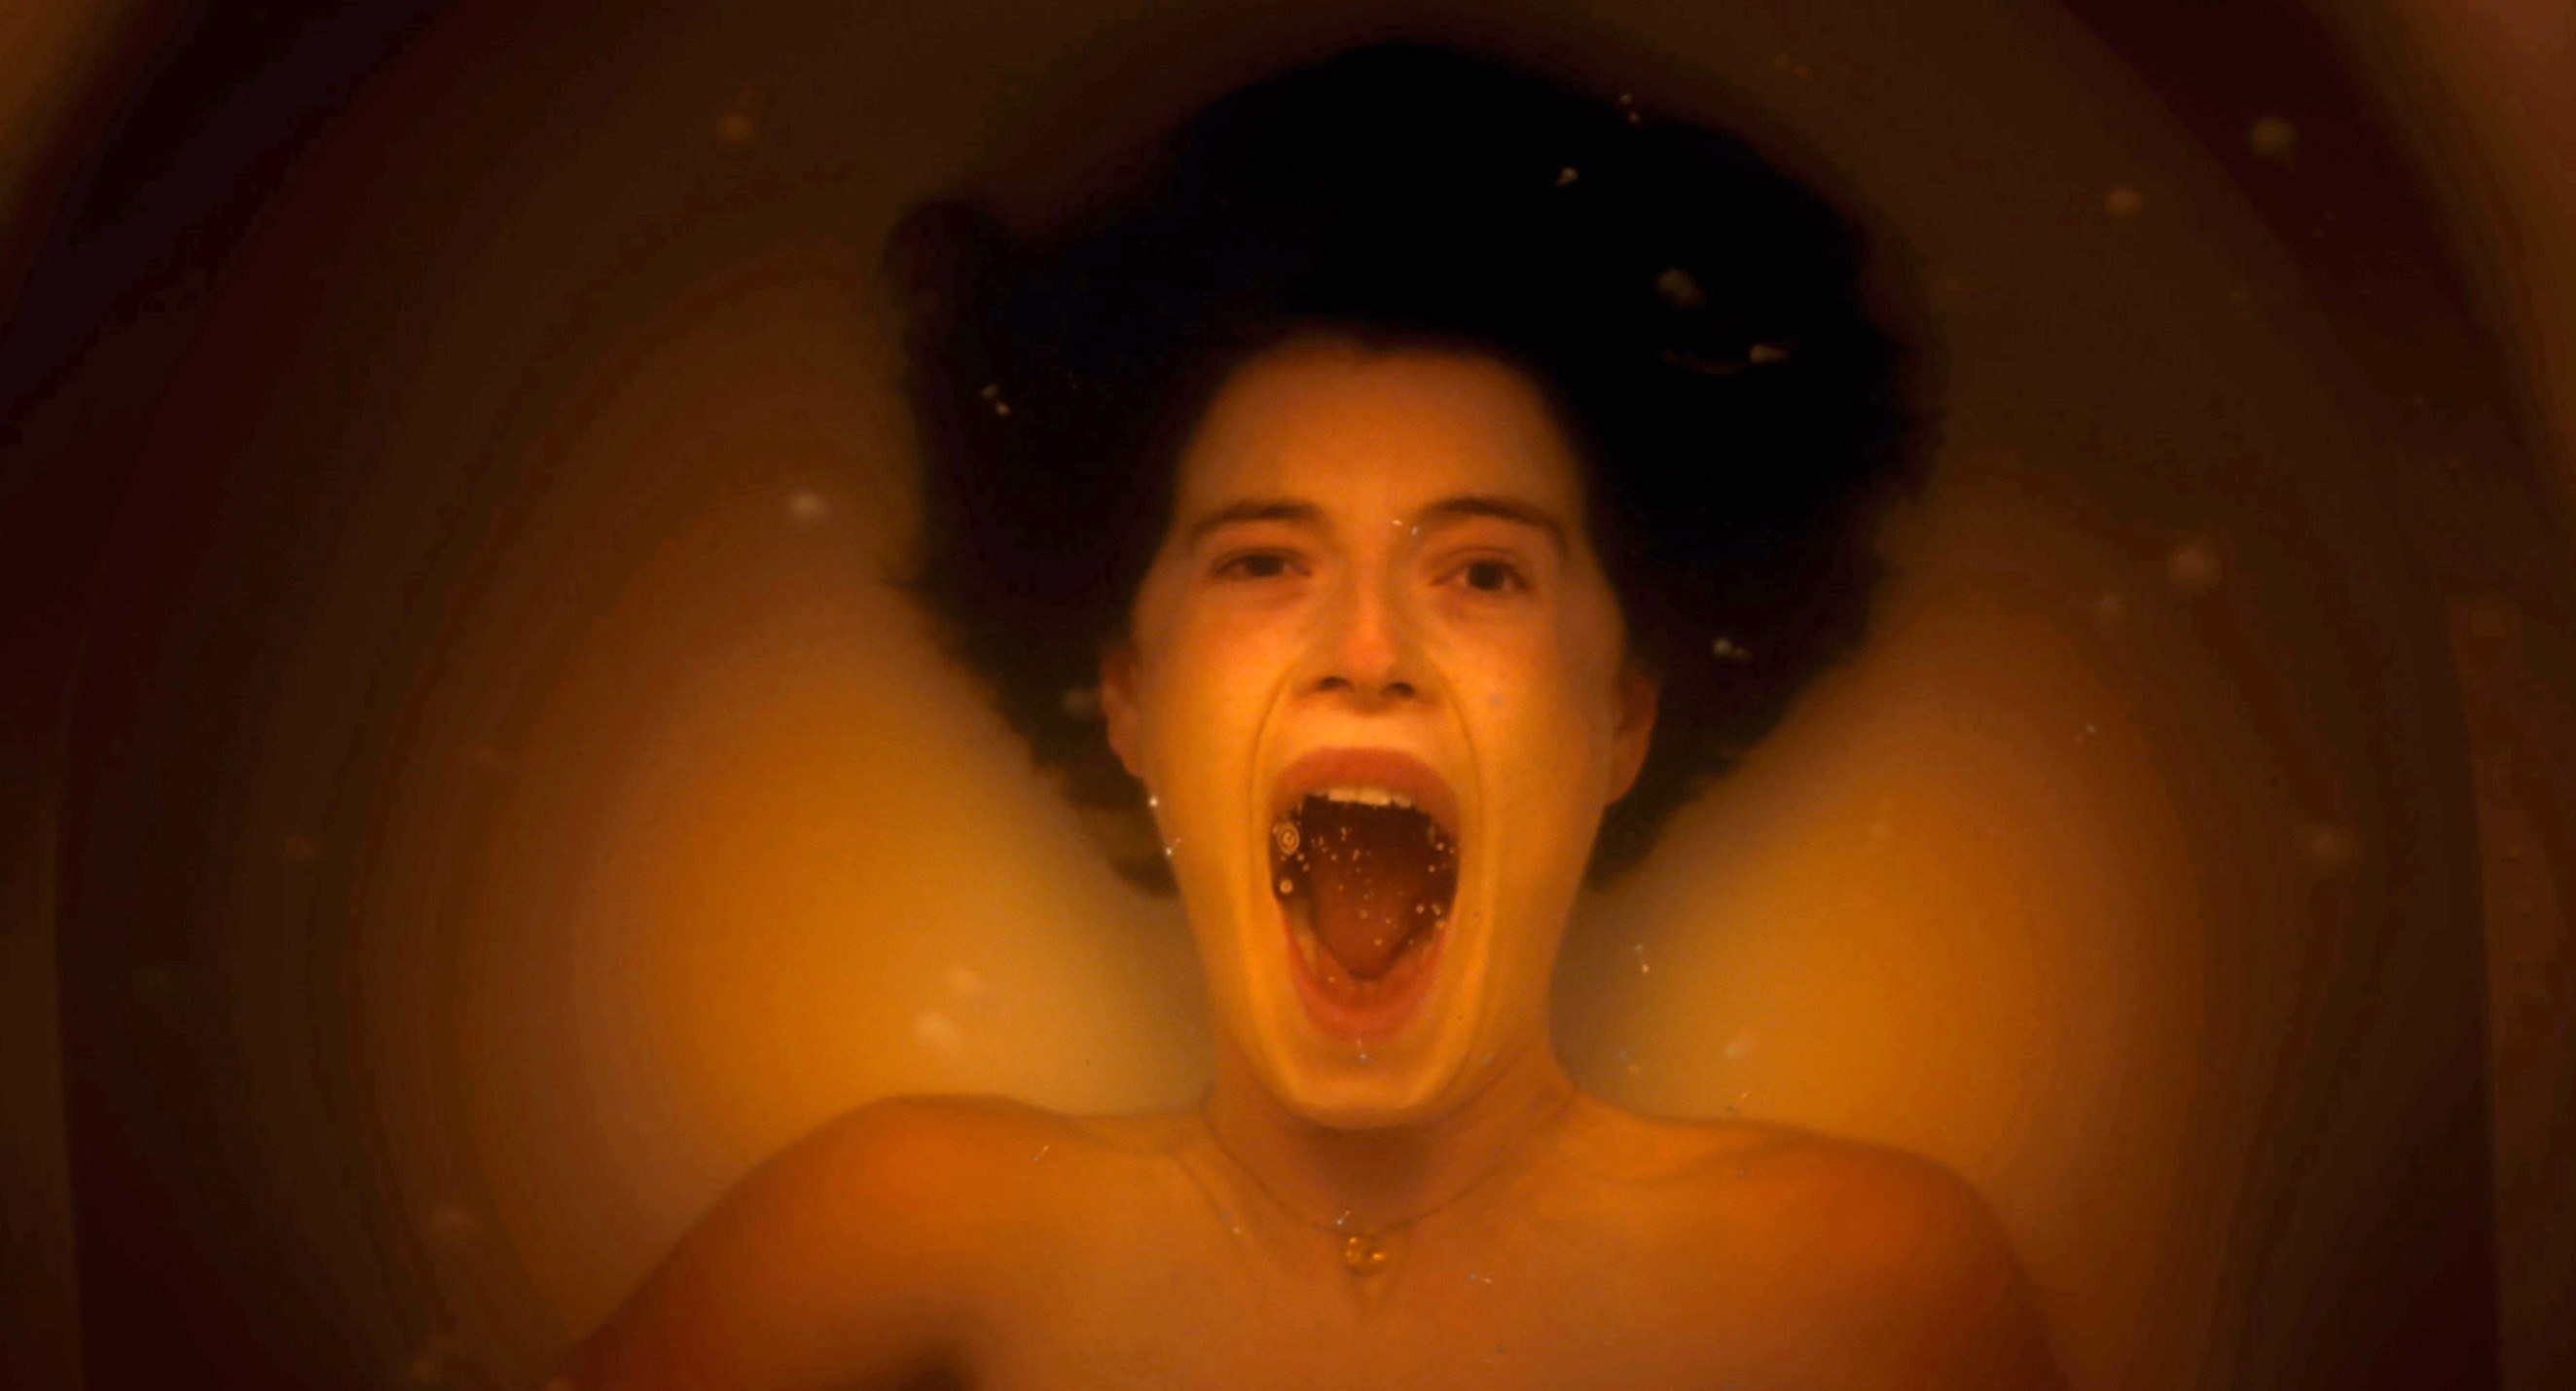 Harper lying underwater in a bathtub and screaming; her mouth is abnormally wide